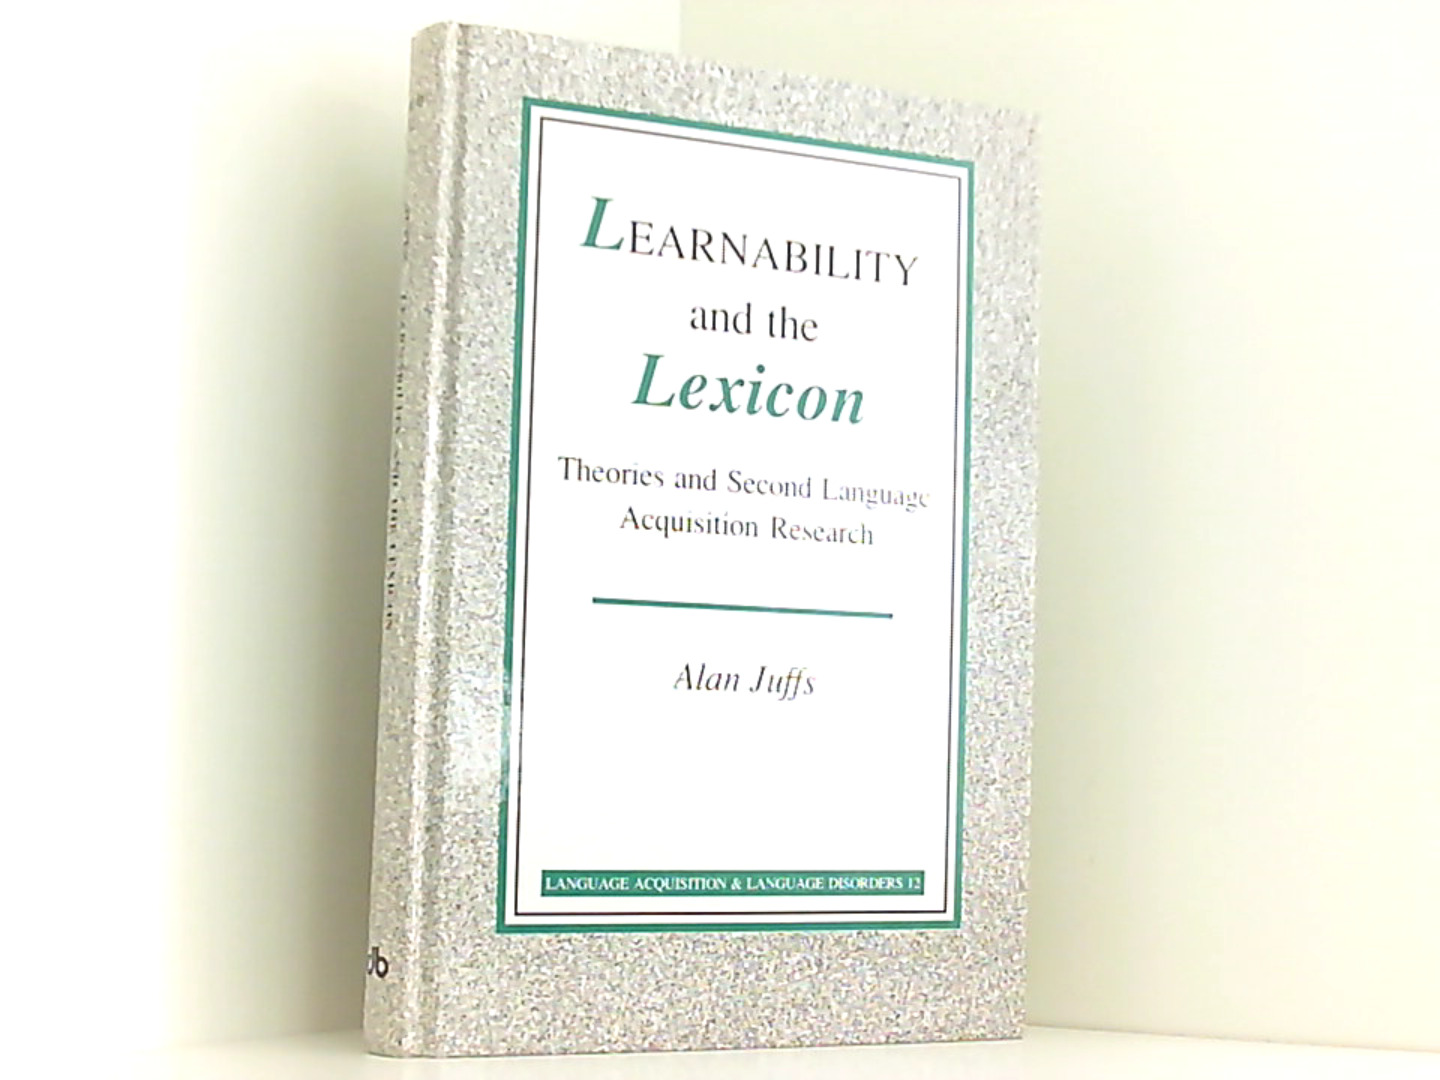 Learnability And the Lexicon: Theories and second language acquisition research (Language Acquisition and Language Disorders, Band 12) - Juffs, Alan